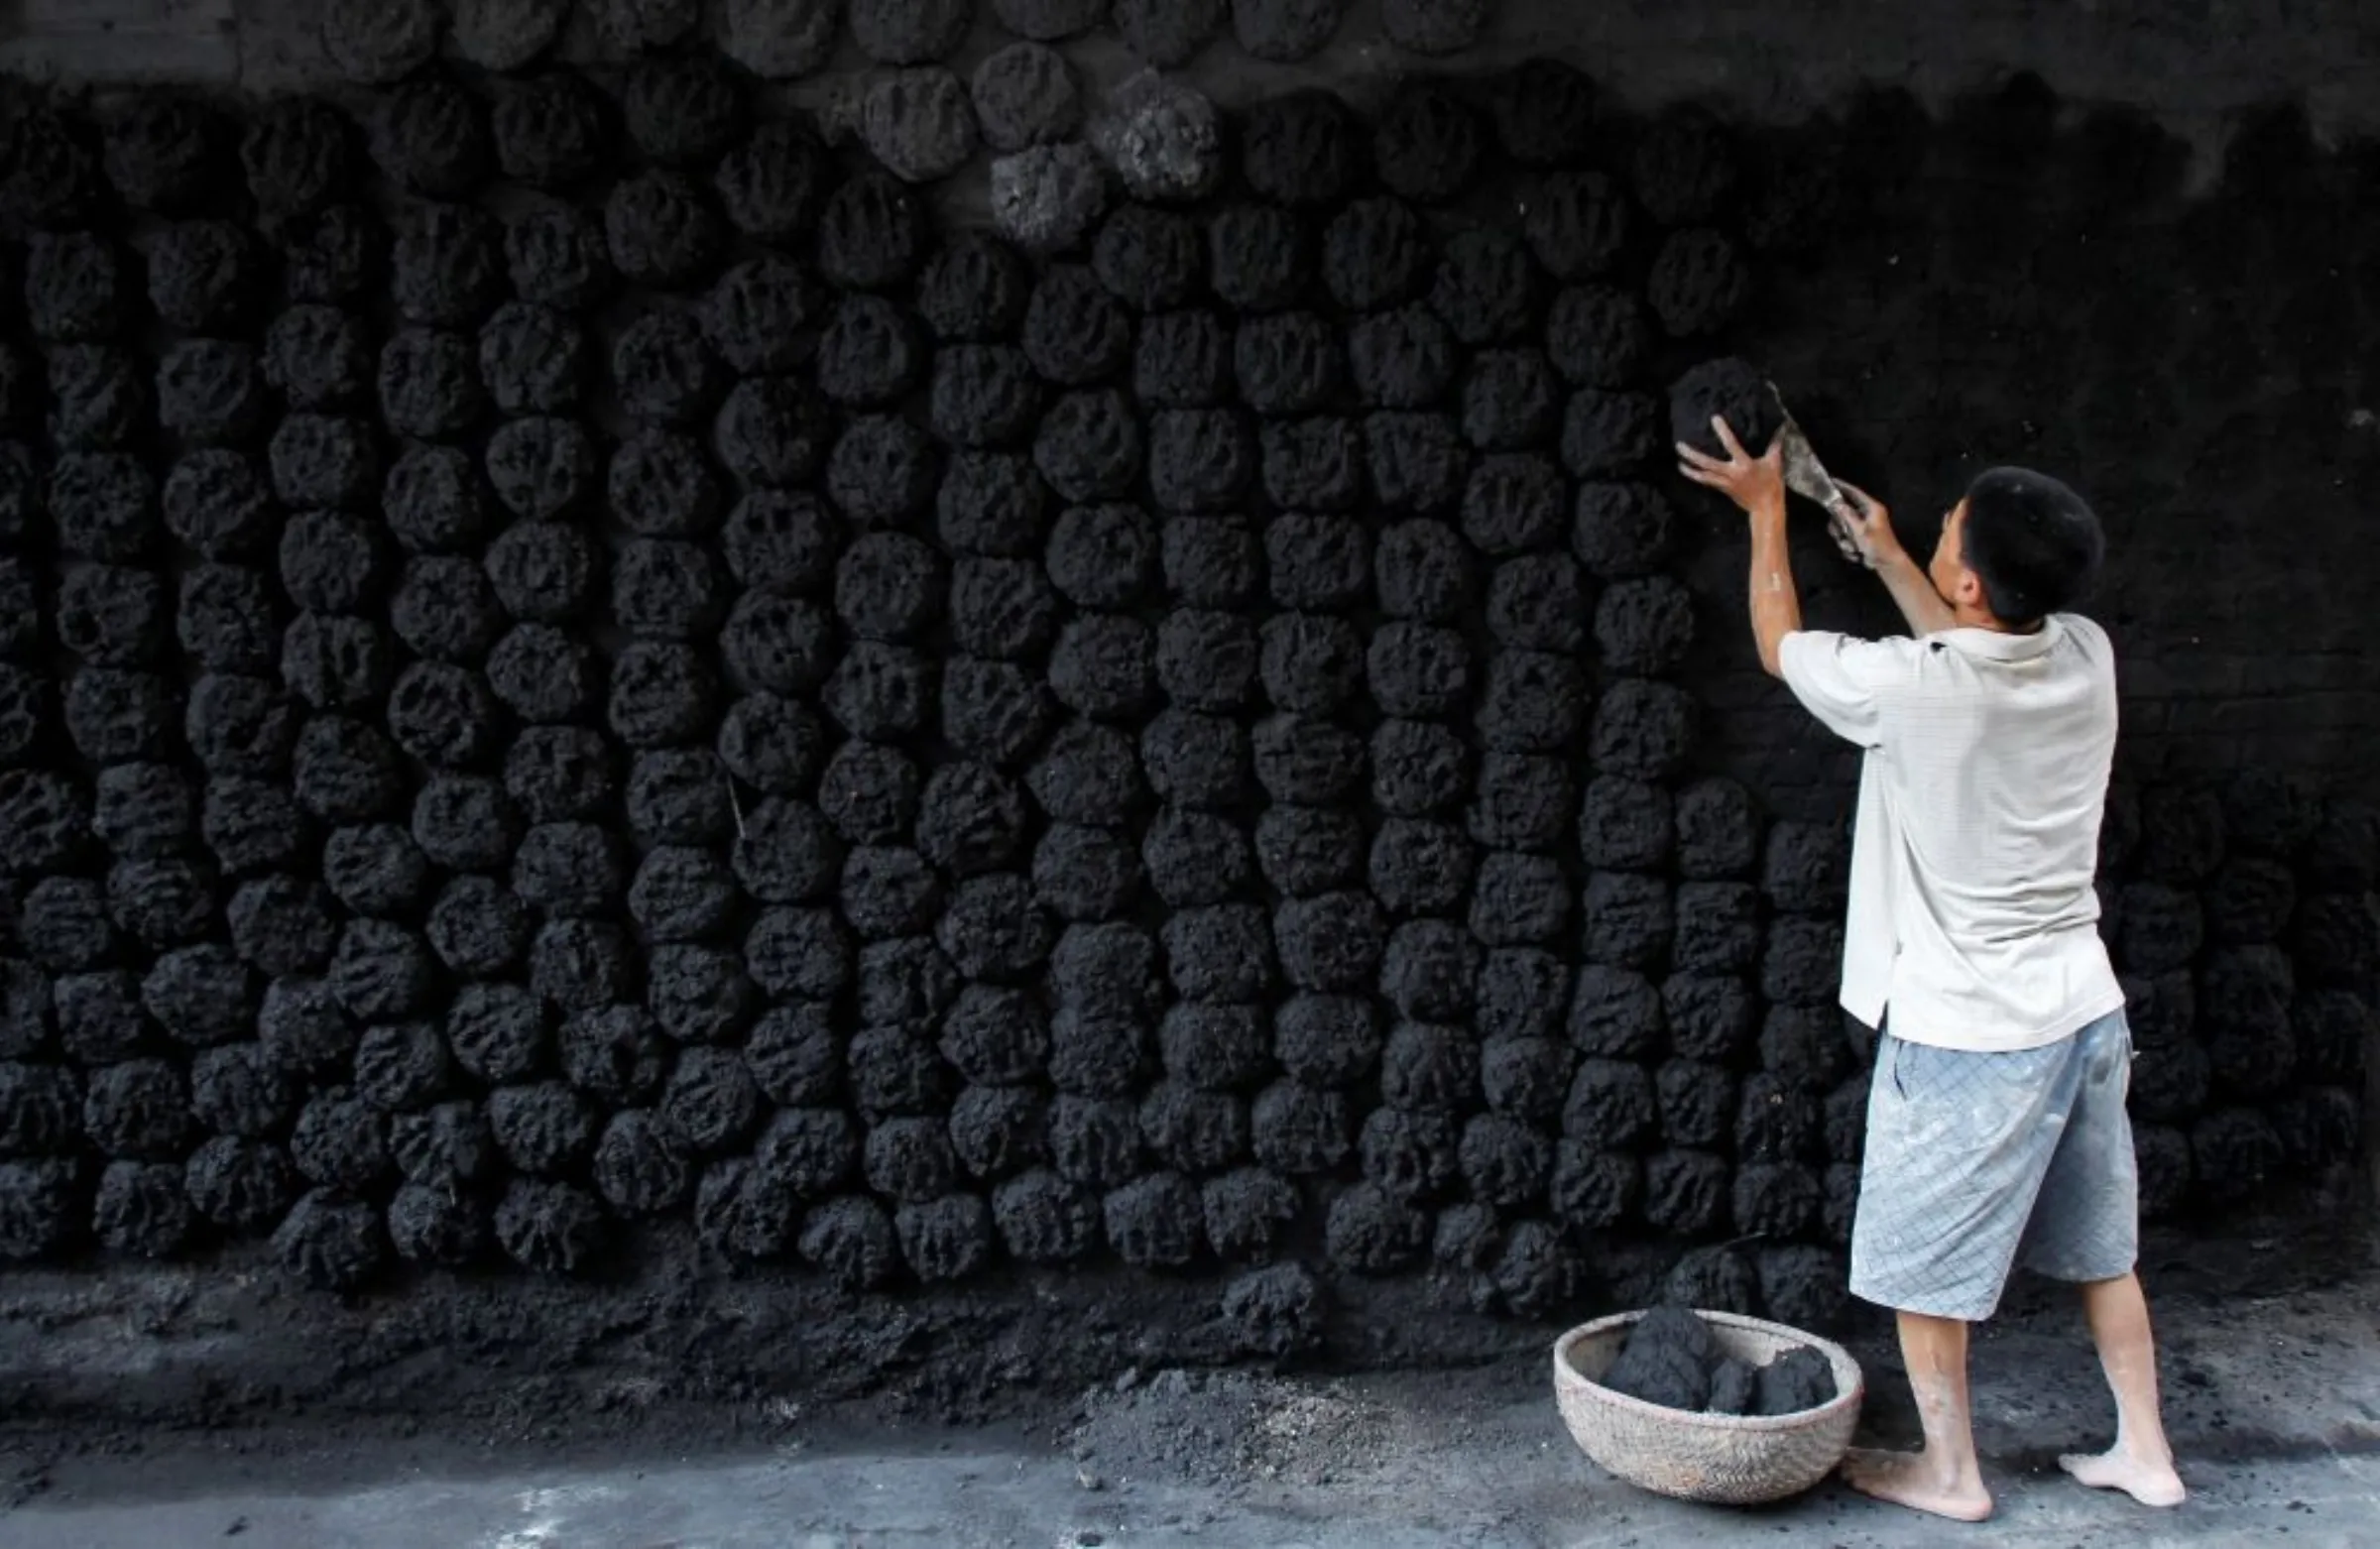 A man lays coal pats, bricks made from coal and paddy, on a wall in Bat Trang village, outside Hanoi November 14, 2011. Bat Trang is renowned for its traditional pottery and ceramics industry and is one of the biggest porcelain makers in Northern Vietnam. Officials are concerned that coal firing in Vat Trang is a cause of pollution which is reaching unacceptable levels.